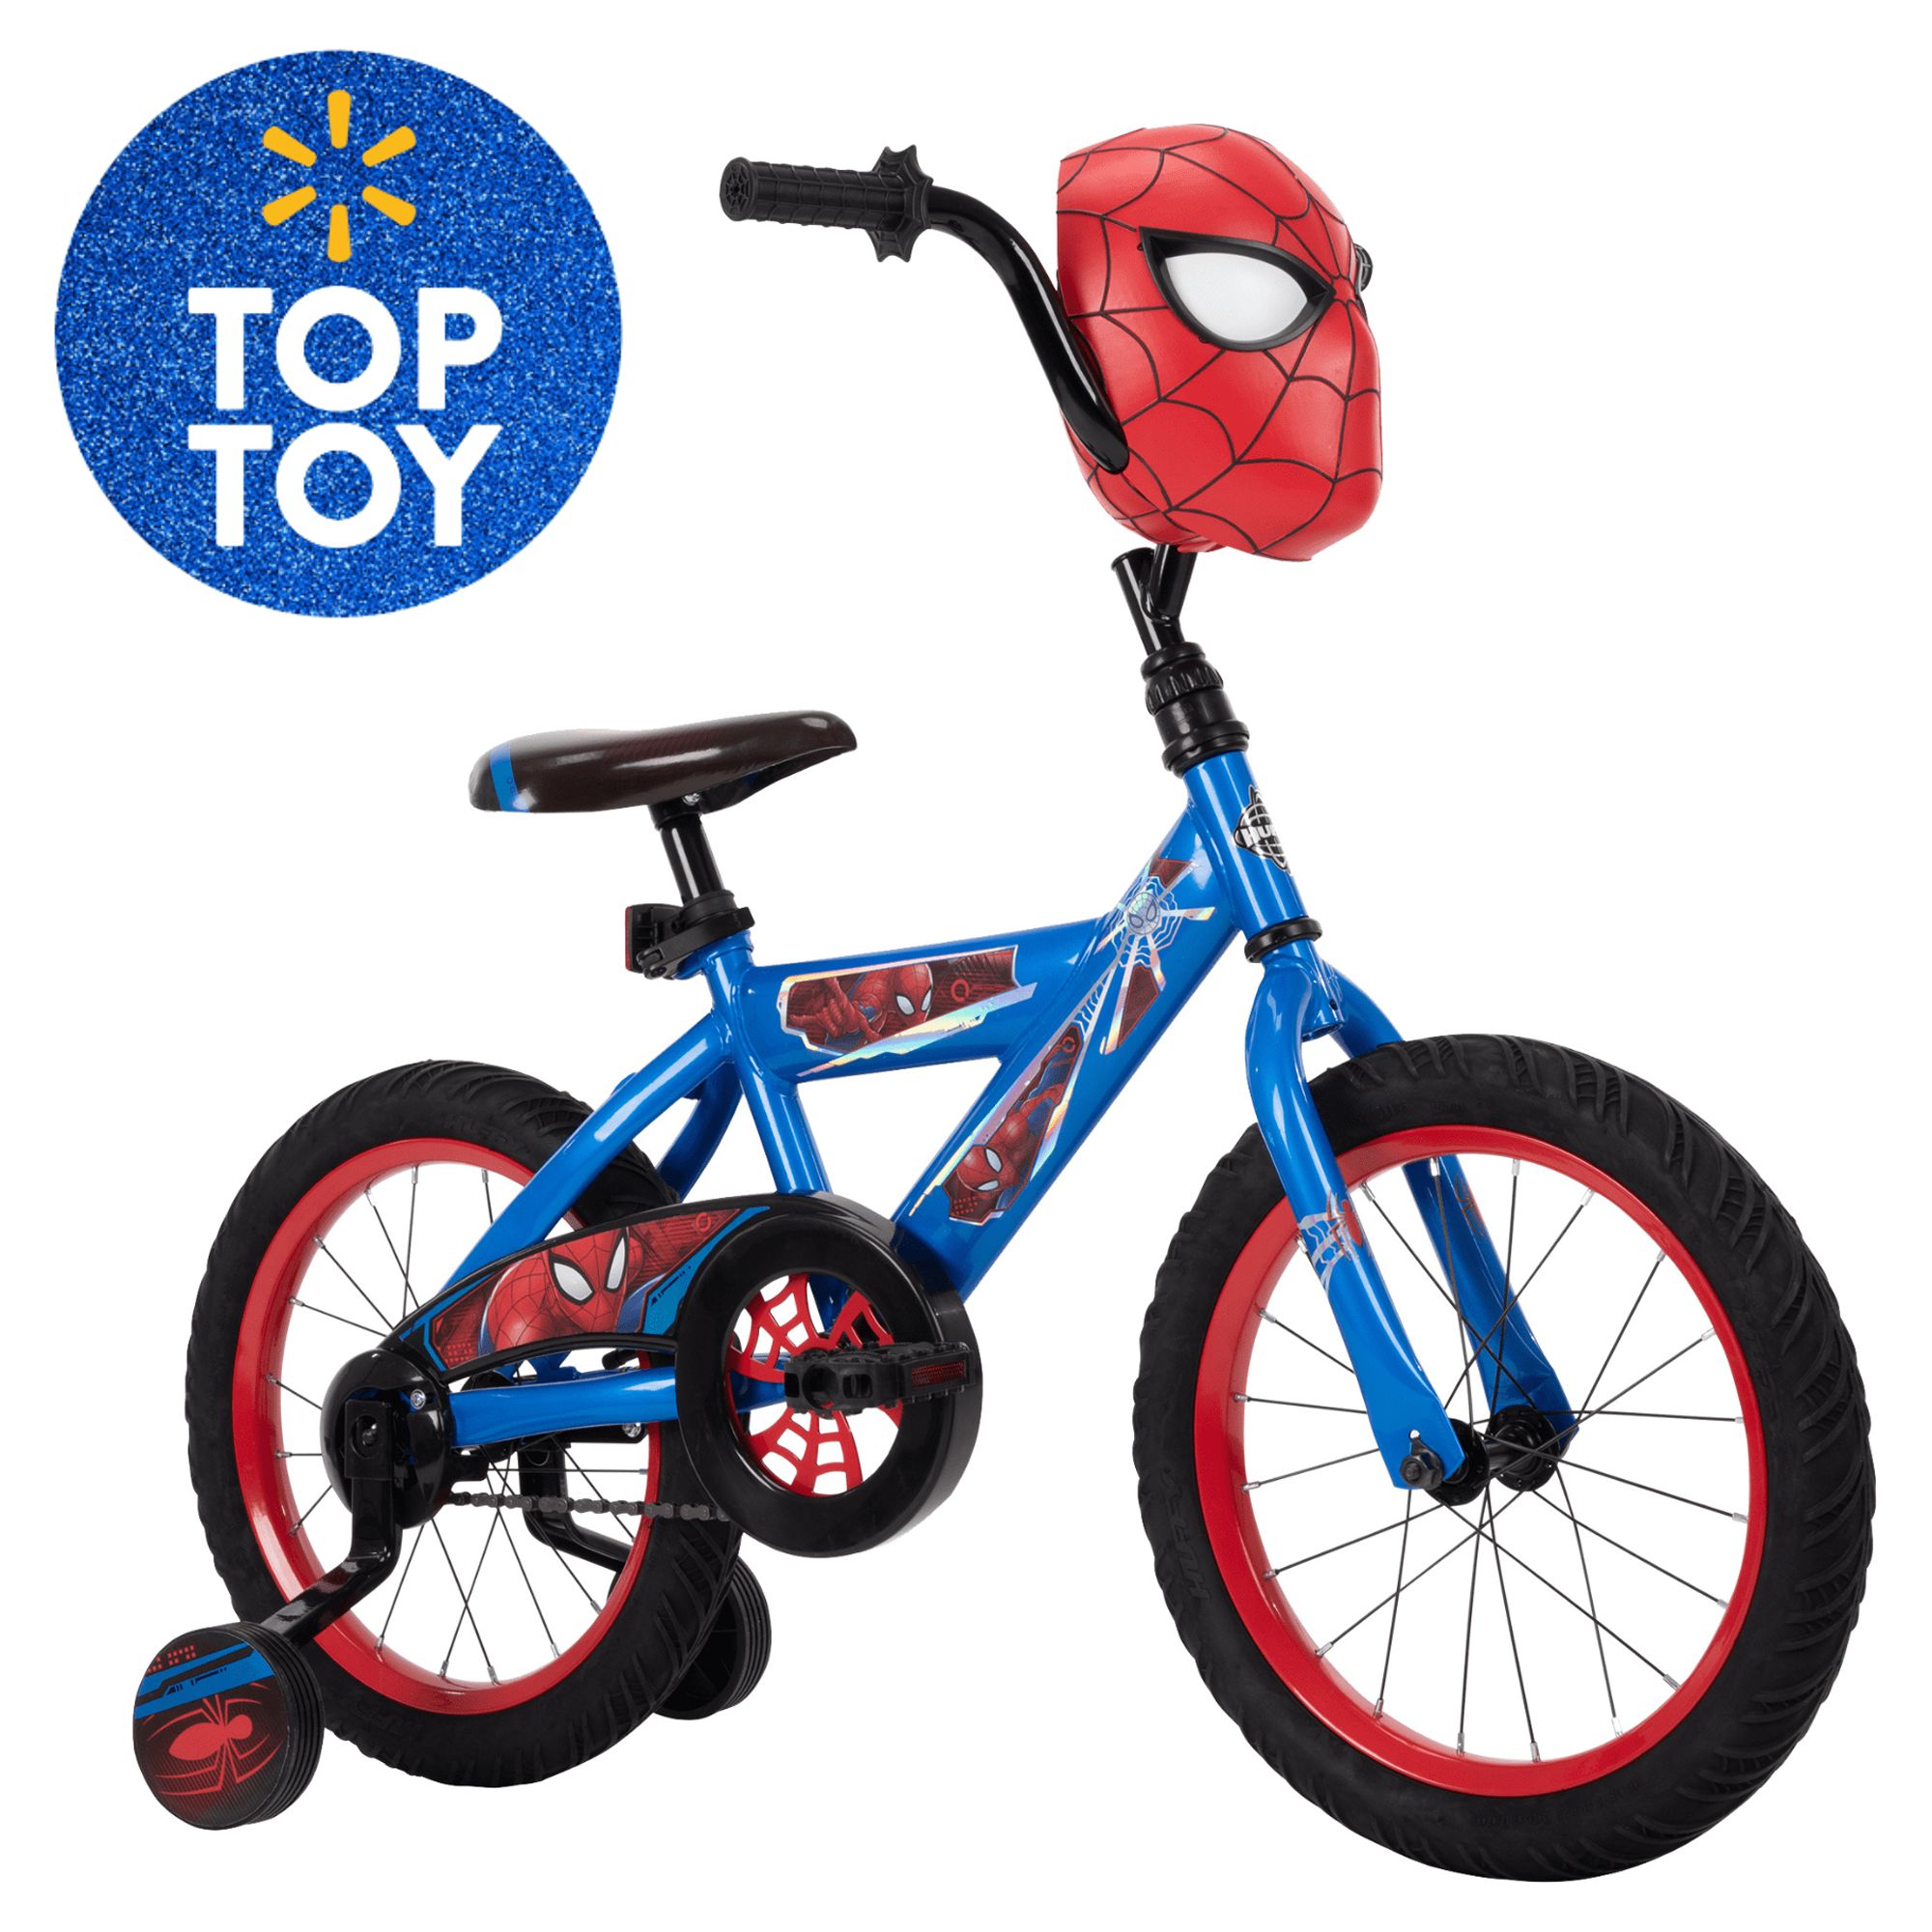 16" Marvel Spider-Man Bike for Boys' by Huffy - image 2 of 11